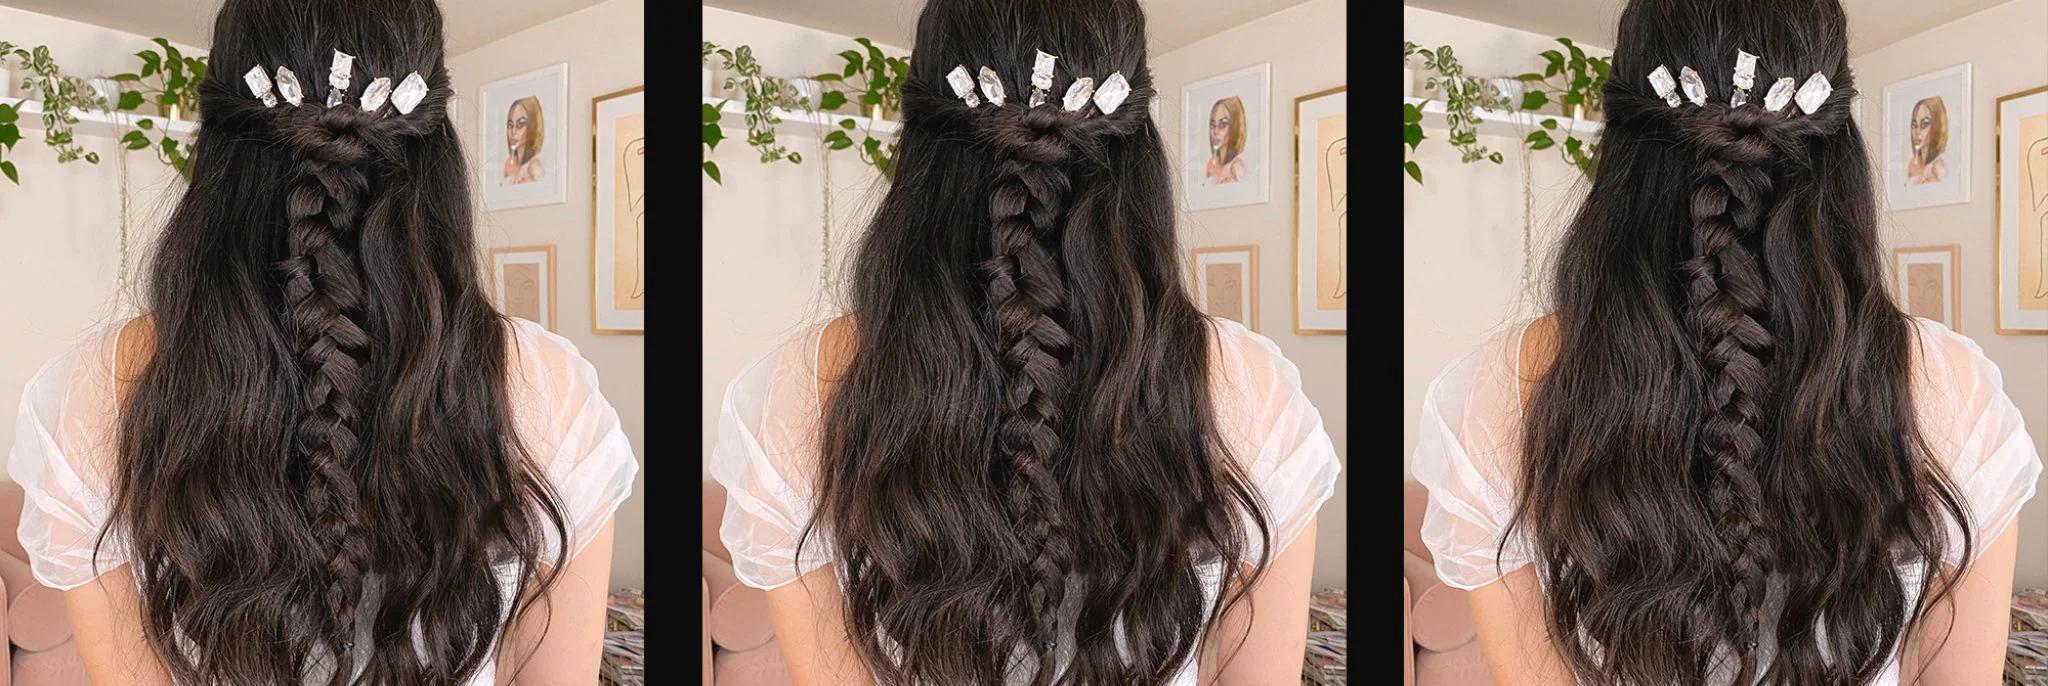 How-To: Romantic Half Up Braided Hairstyle | TRESemmé US